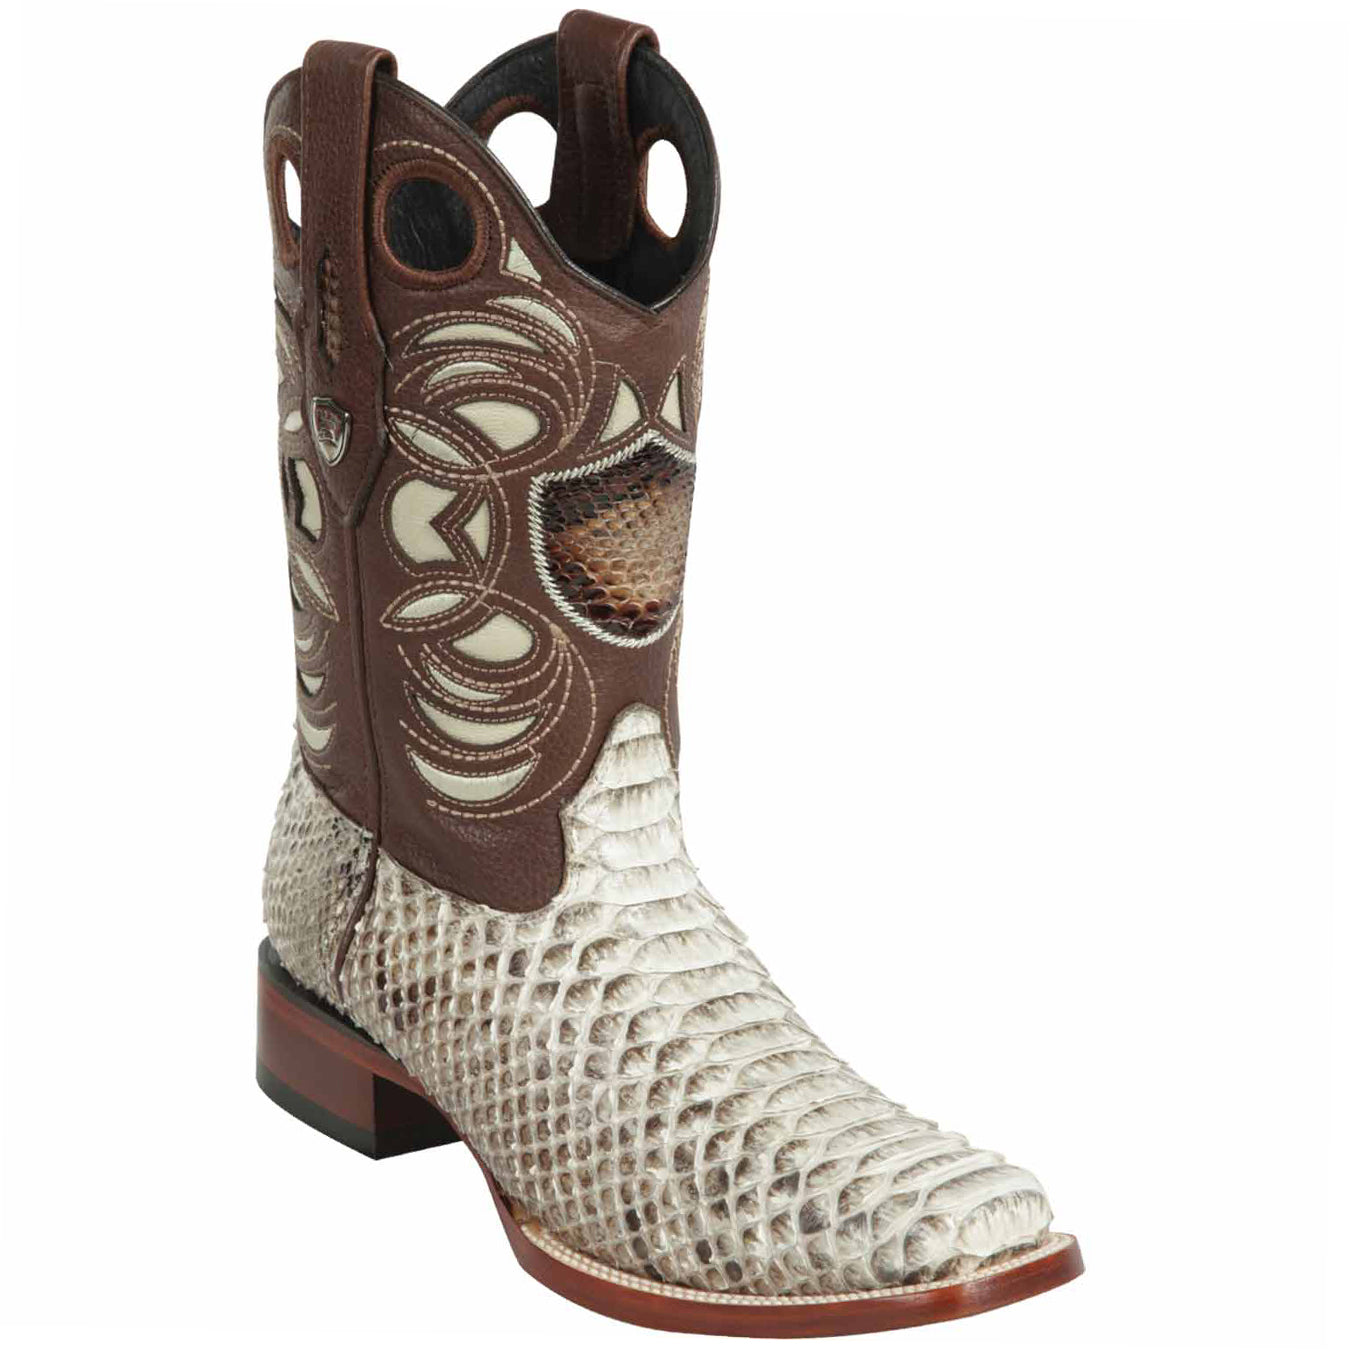 Mens Square Toe Snakeskin Boots - Wild West Boots